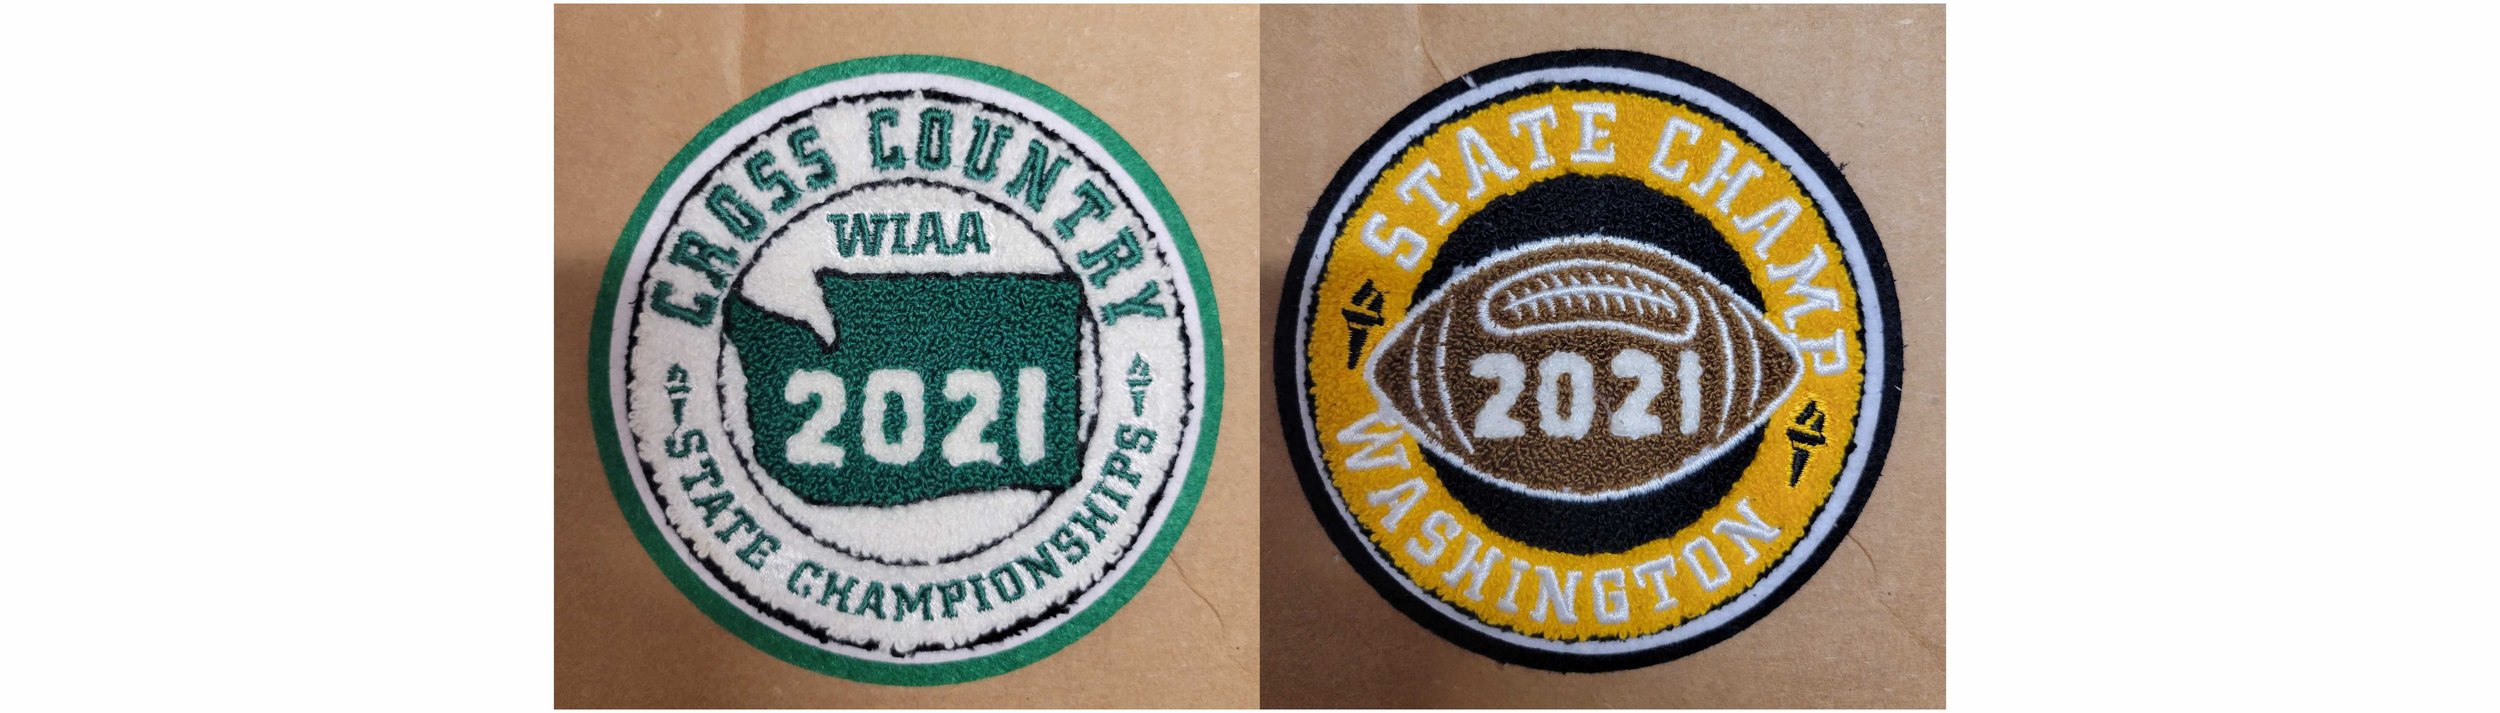 Custom Patches For Letterman Jackets